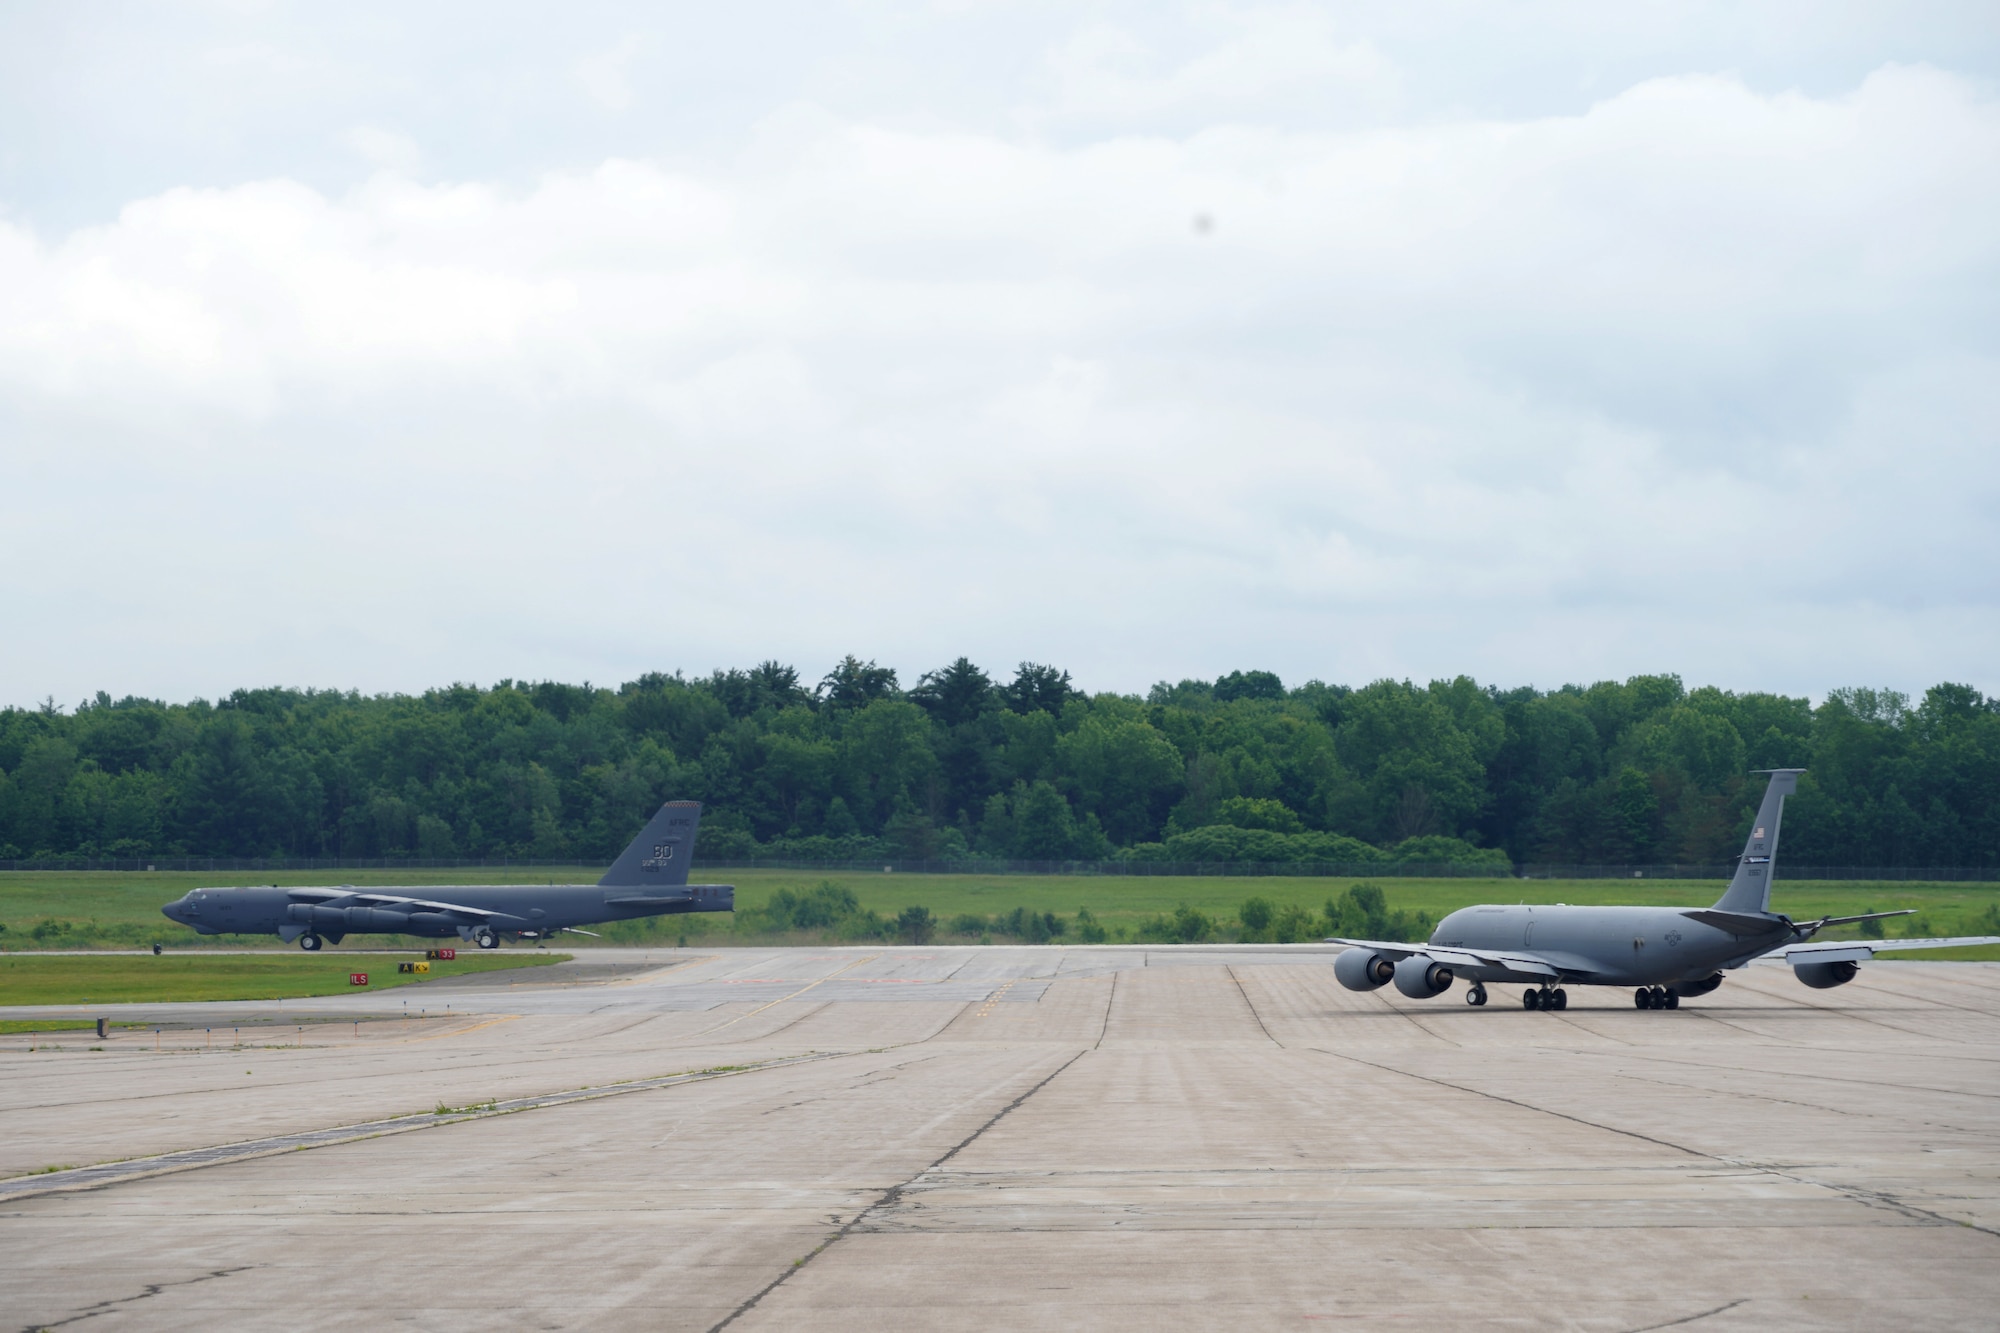 A B-52 Stratofortress assigned to the 307th Bomb Wing and KC-135 Stratotanker assigned to the 914th Air Refueling Wing, taxi for departure at Griffiss International Airport, Rome, New York, site of the former Strategic Air Command base.